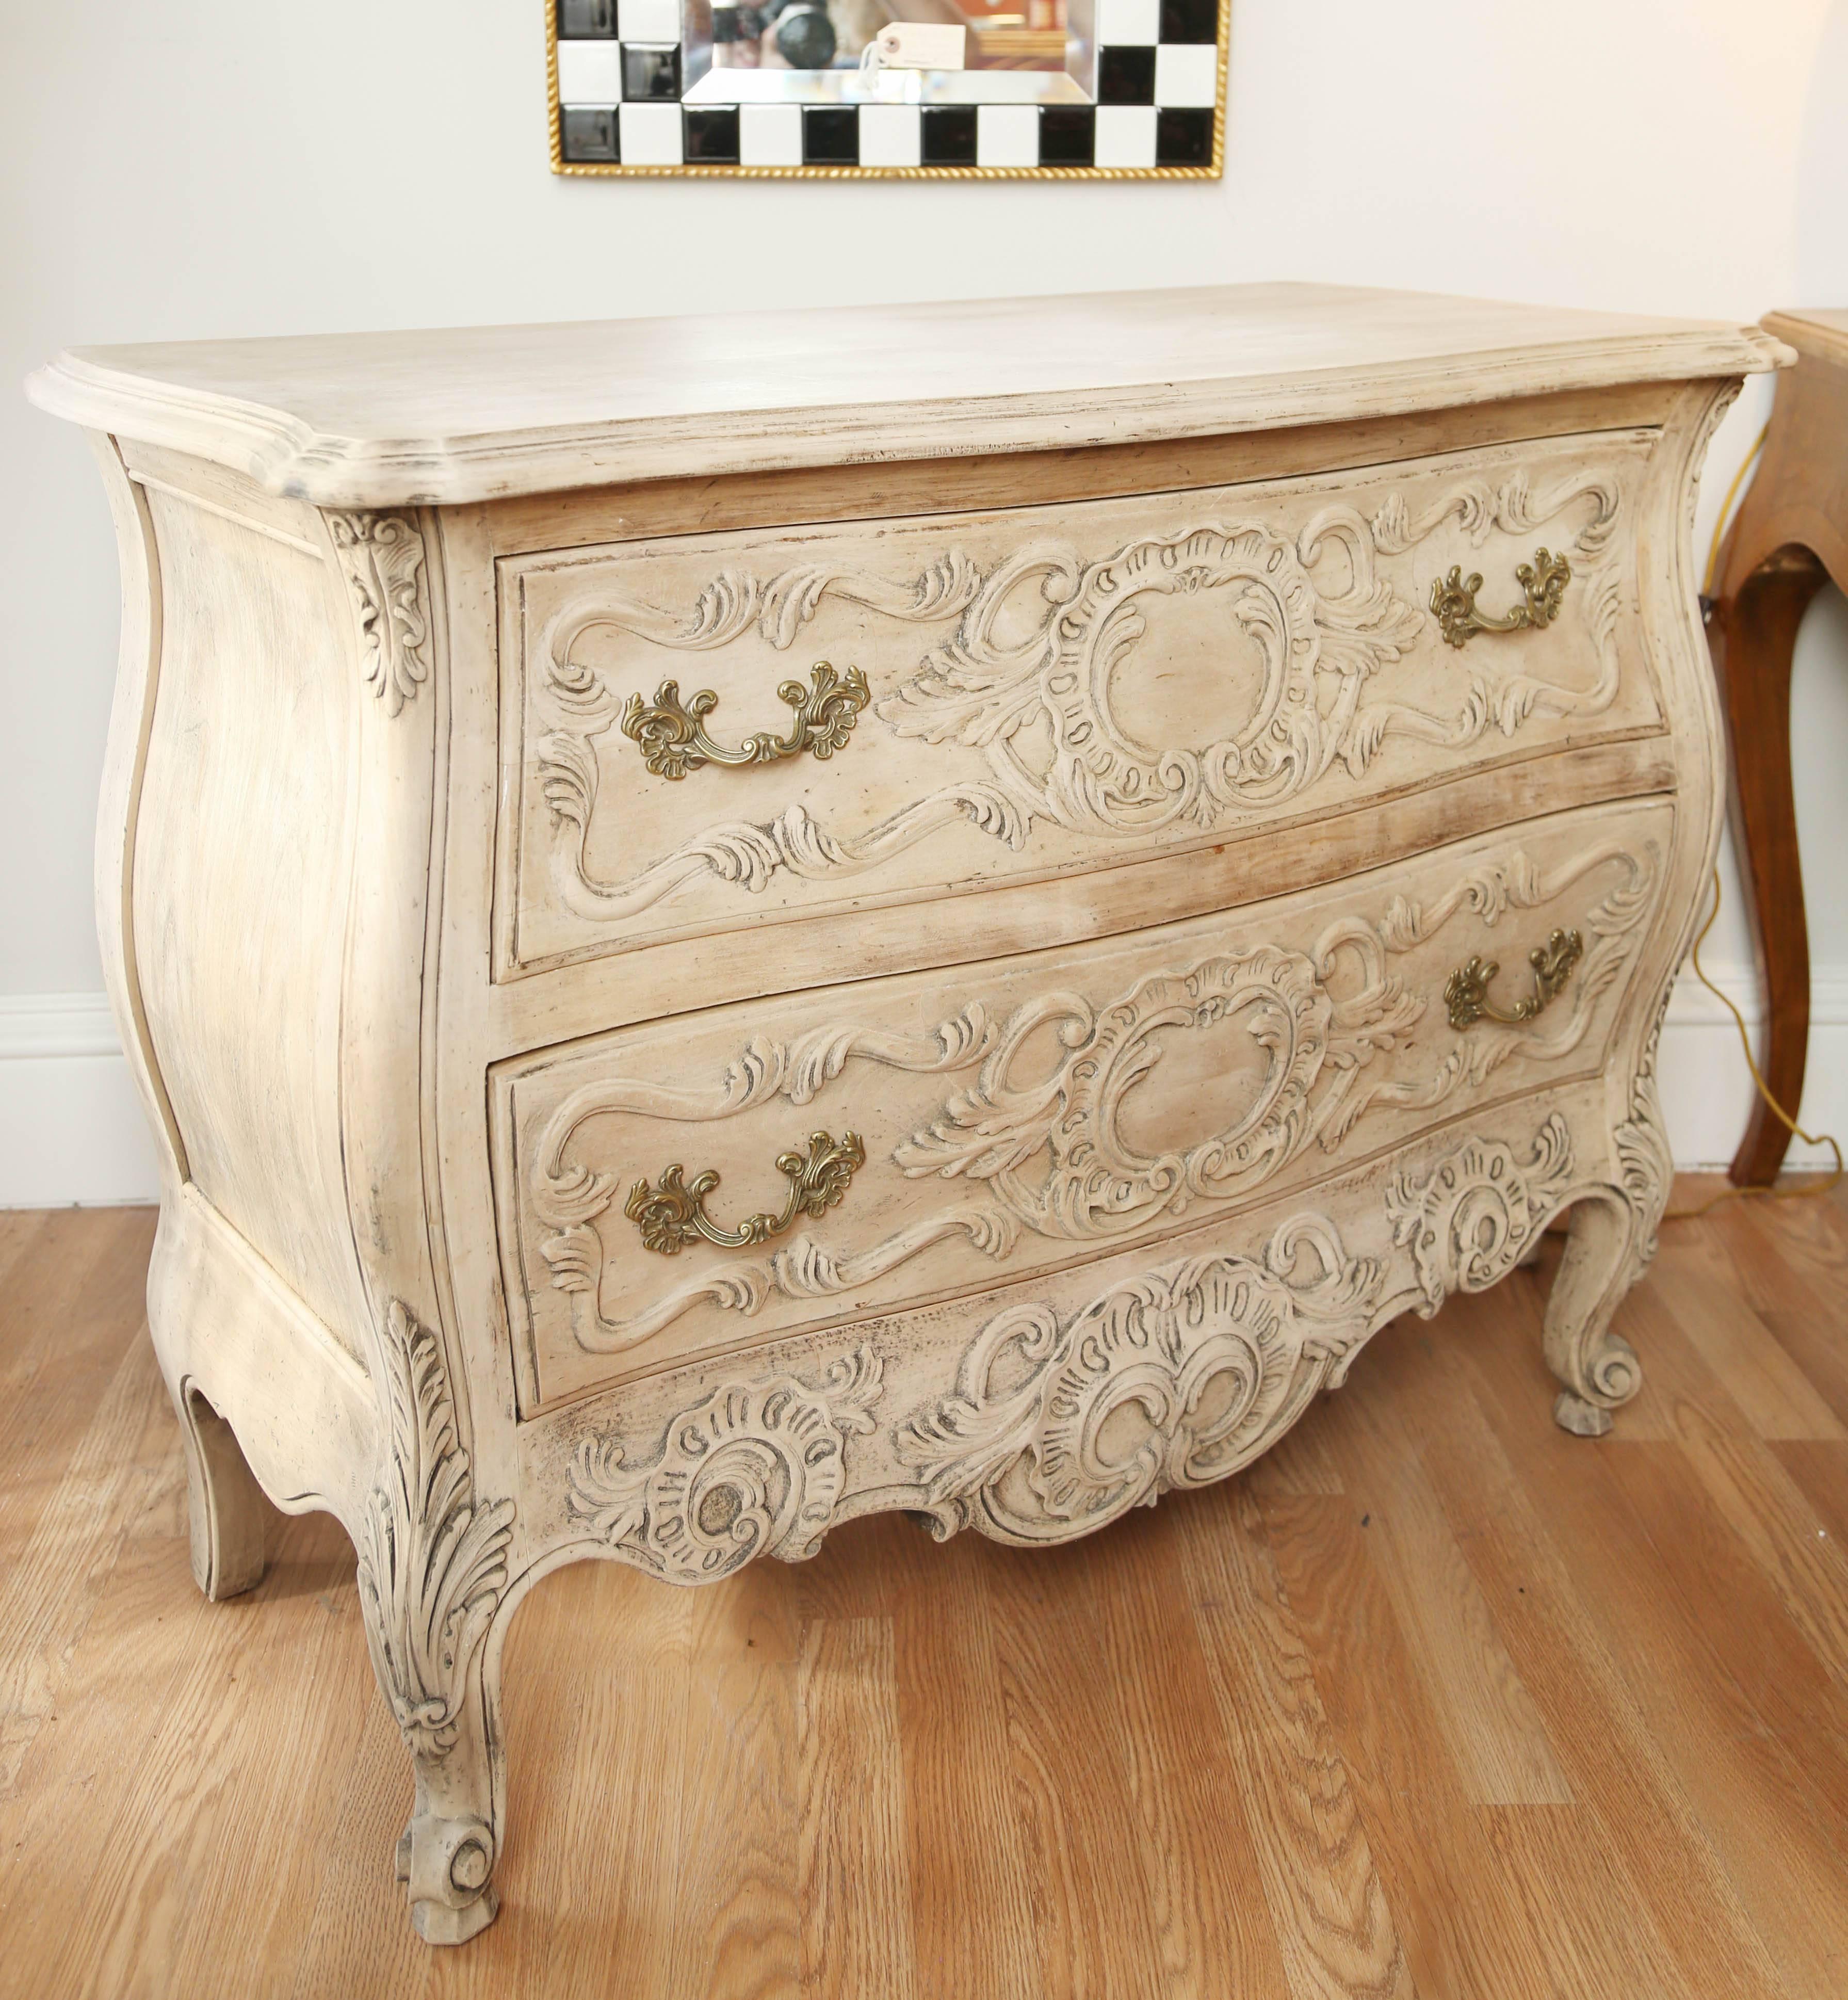 Beautifully carved and detailed French style commode with a stripped and bleached natural finish.